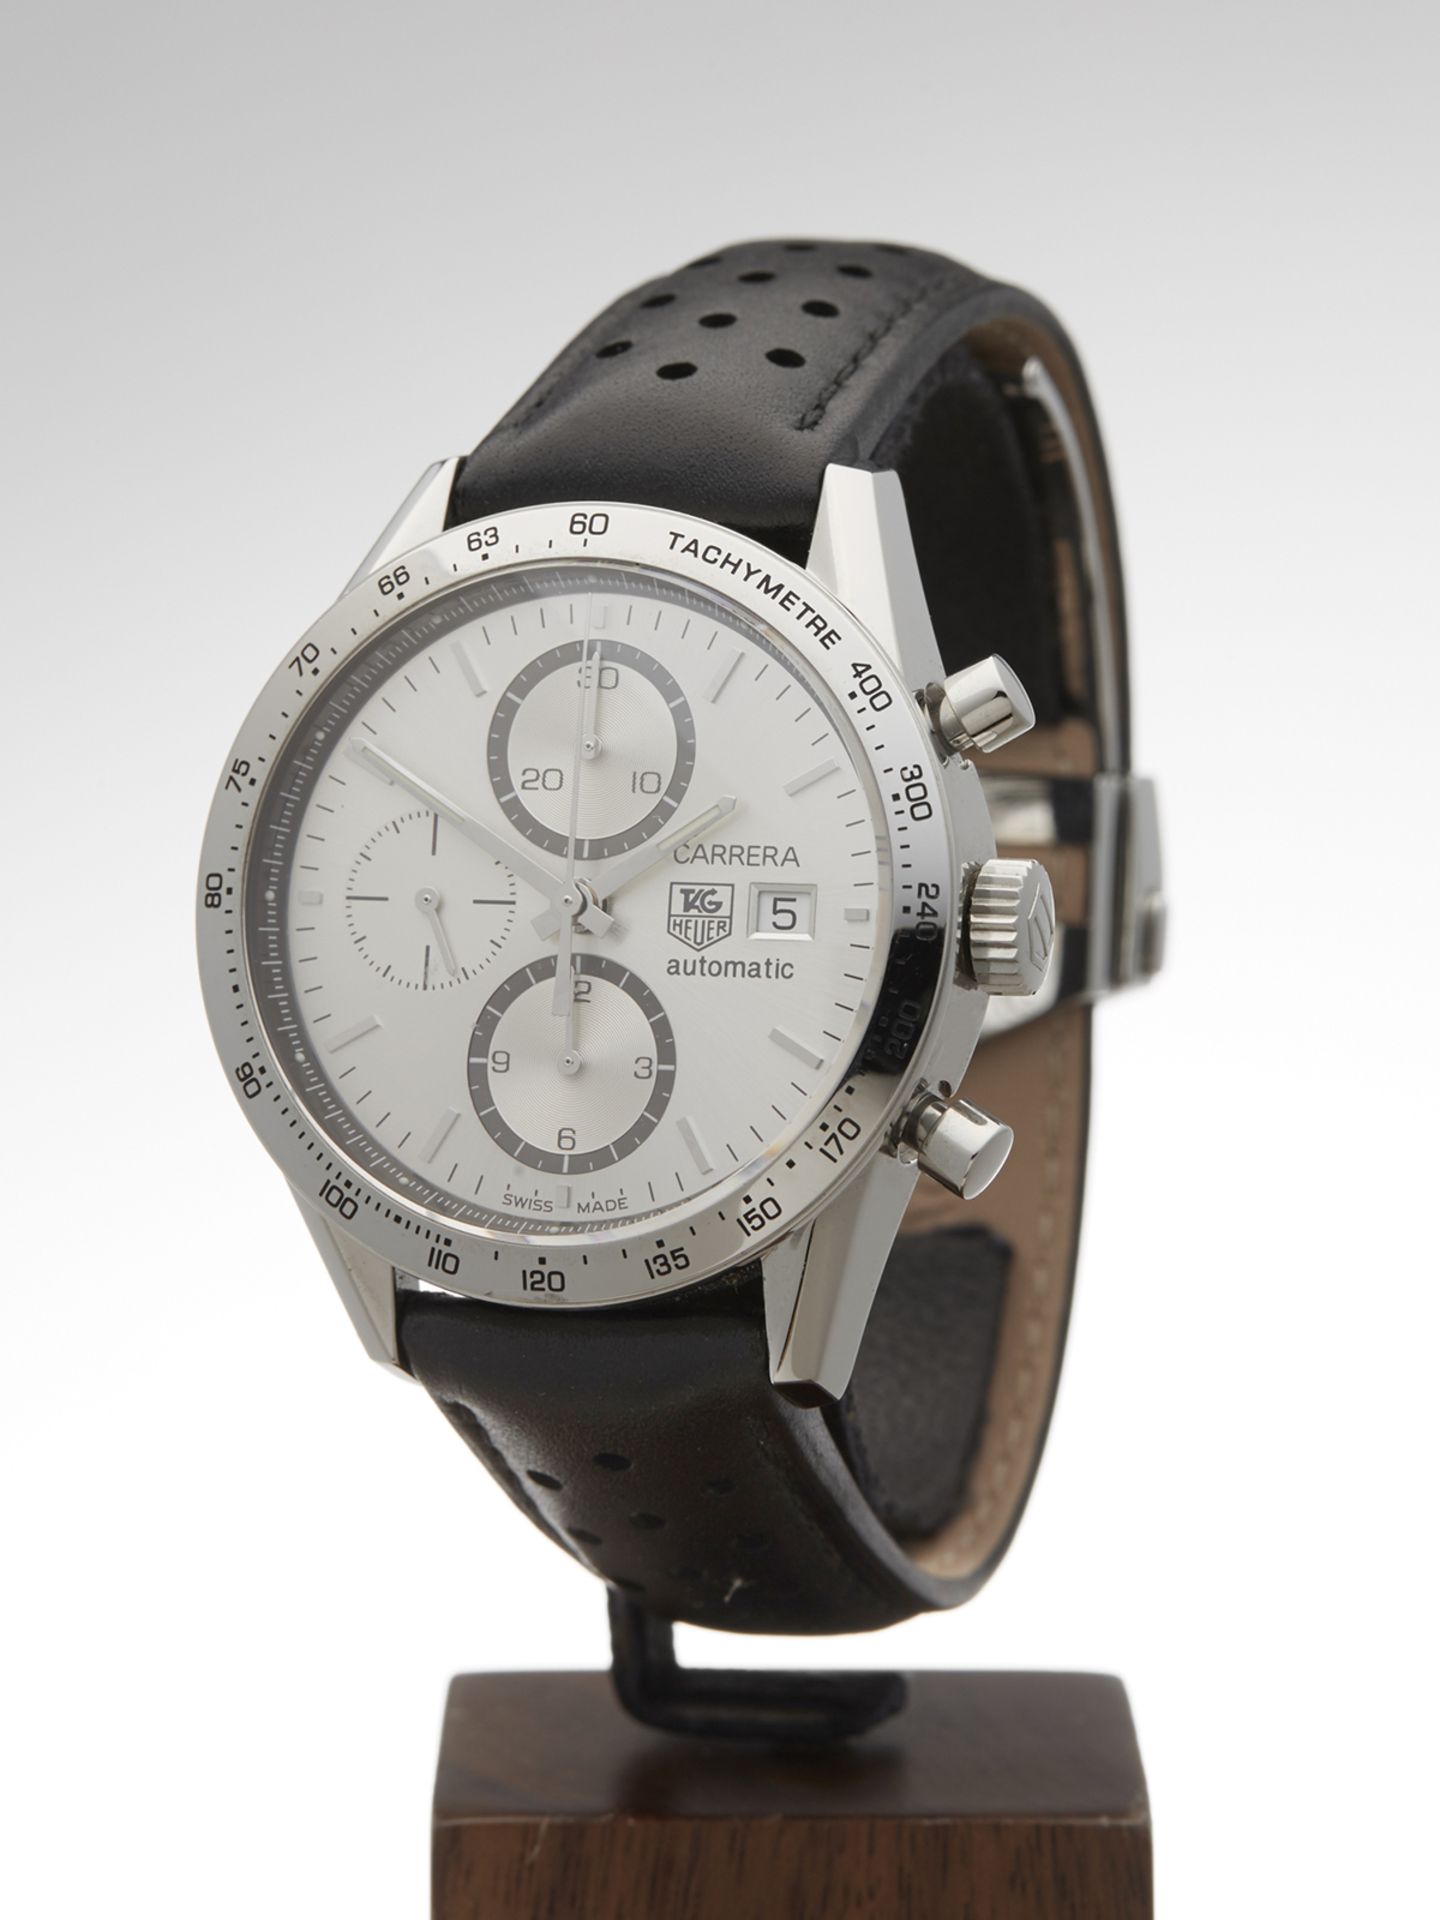 Tag Heuer Carrera - Image 2 of 9